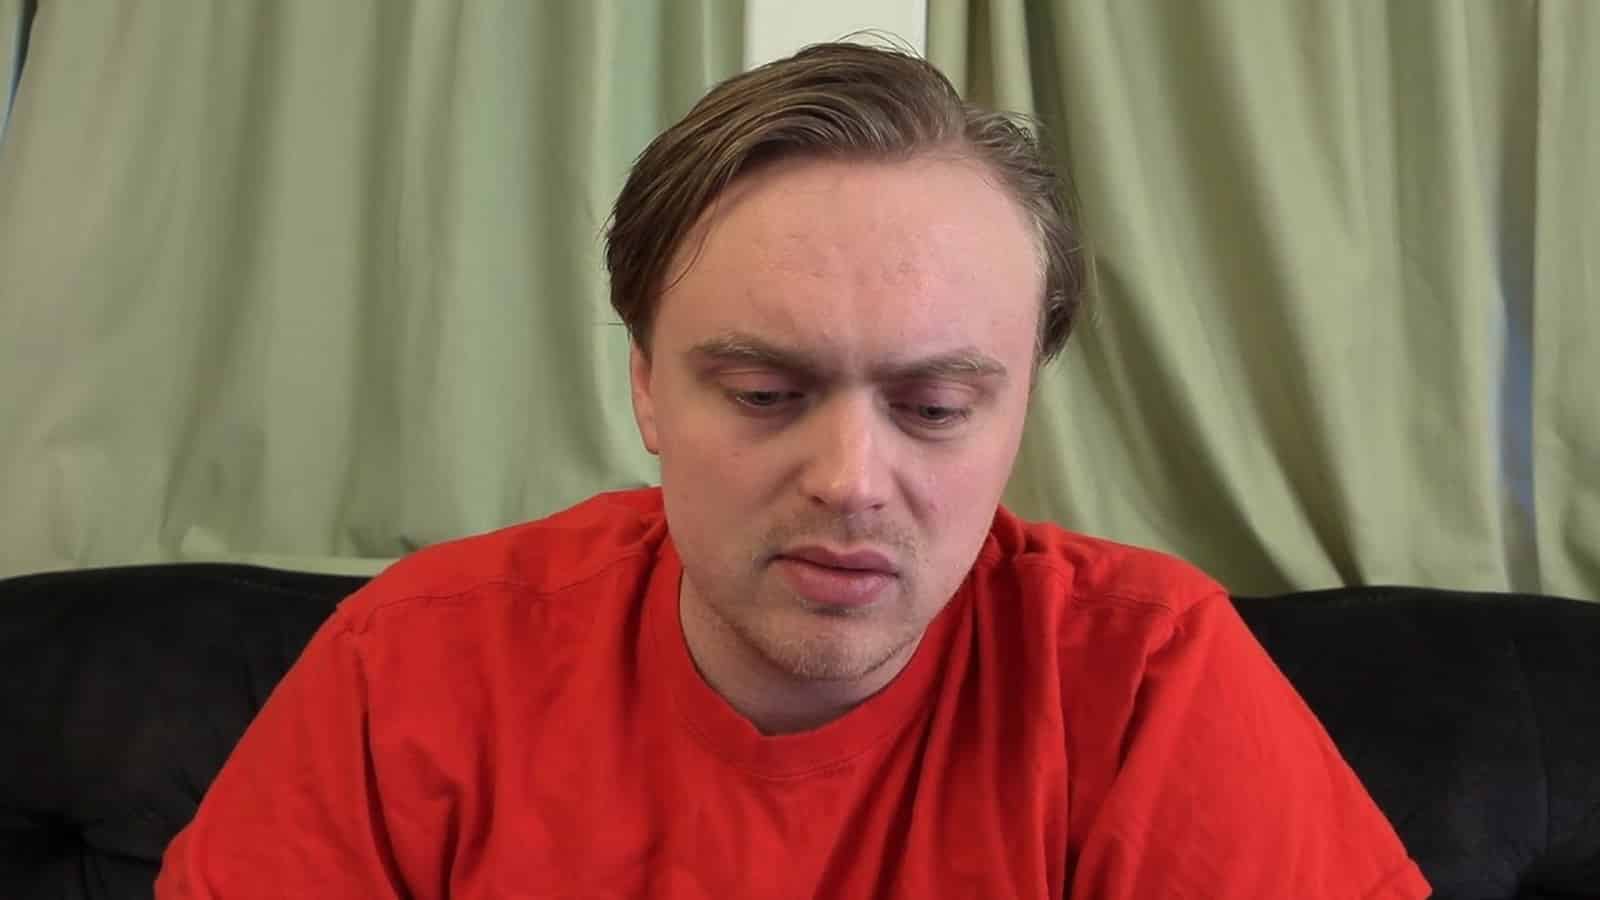 An image of YouTuber Gus Johnson